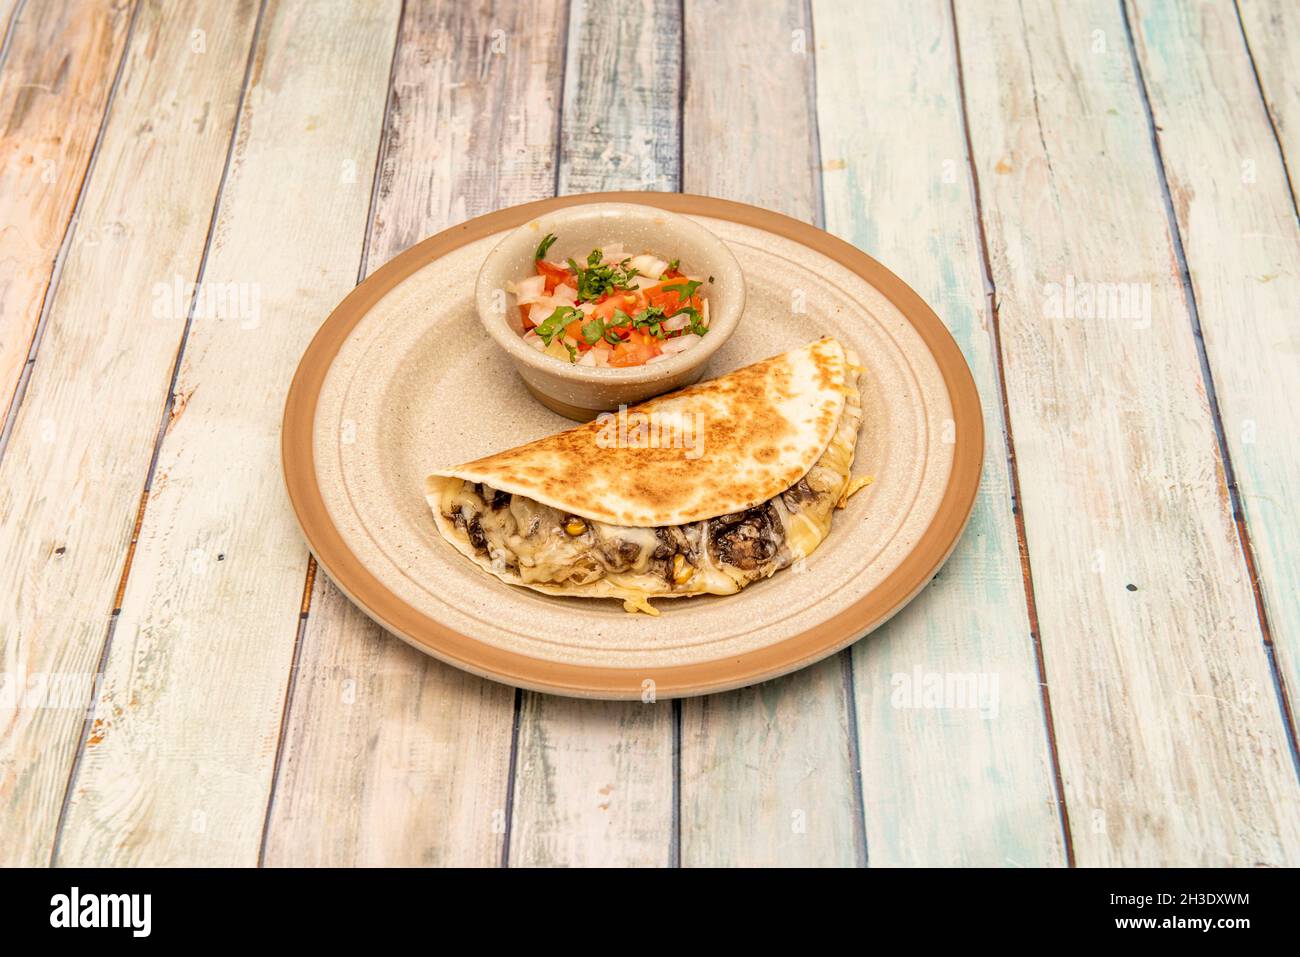 Mexican huitlacoche quesadilla with corn mushroom and melted strong cheese and pico de gallo Stock Photo